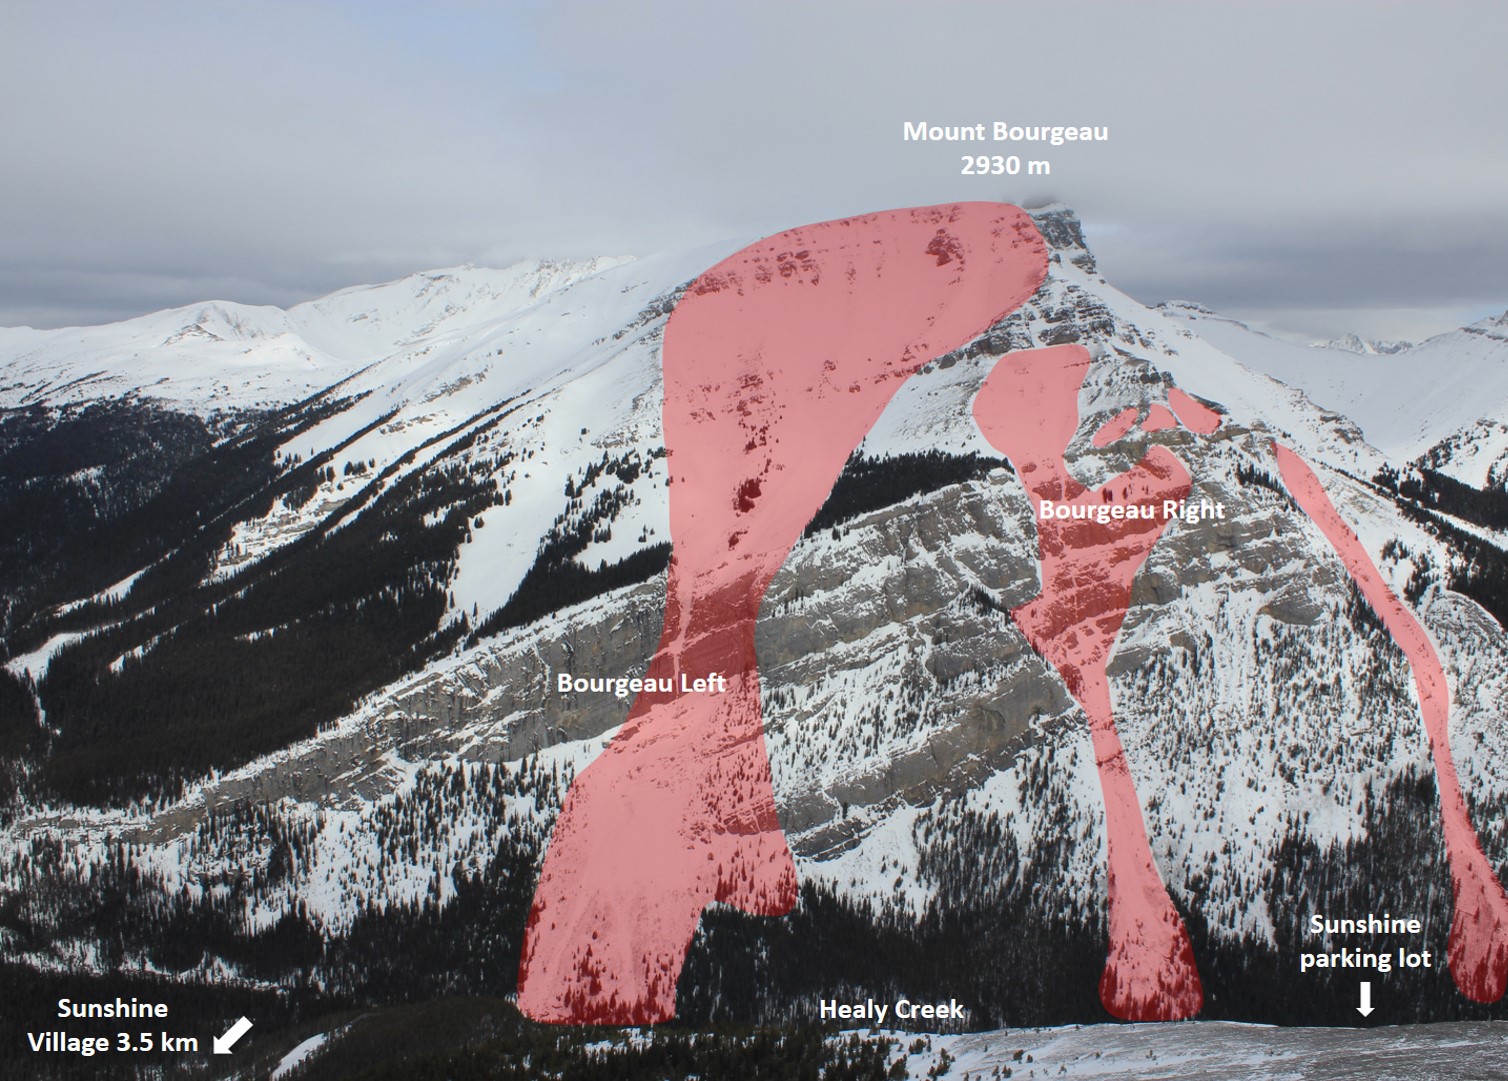 The Bourgeau Left-Hand and Bourgeau Right-Hand ice climbs and the avalanche terrain around them are highlighted in red on an image of the climbs.